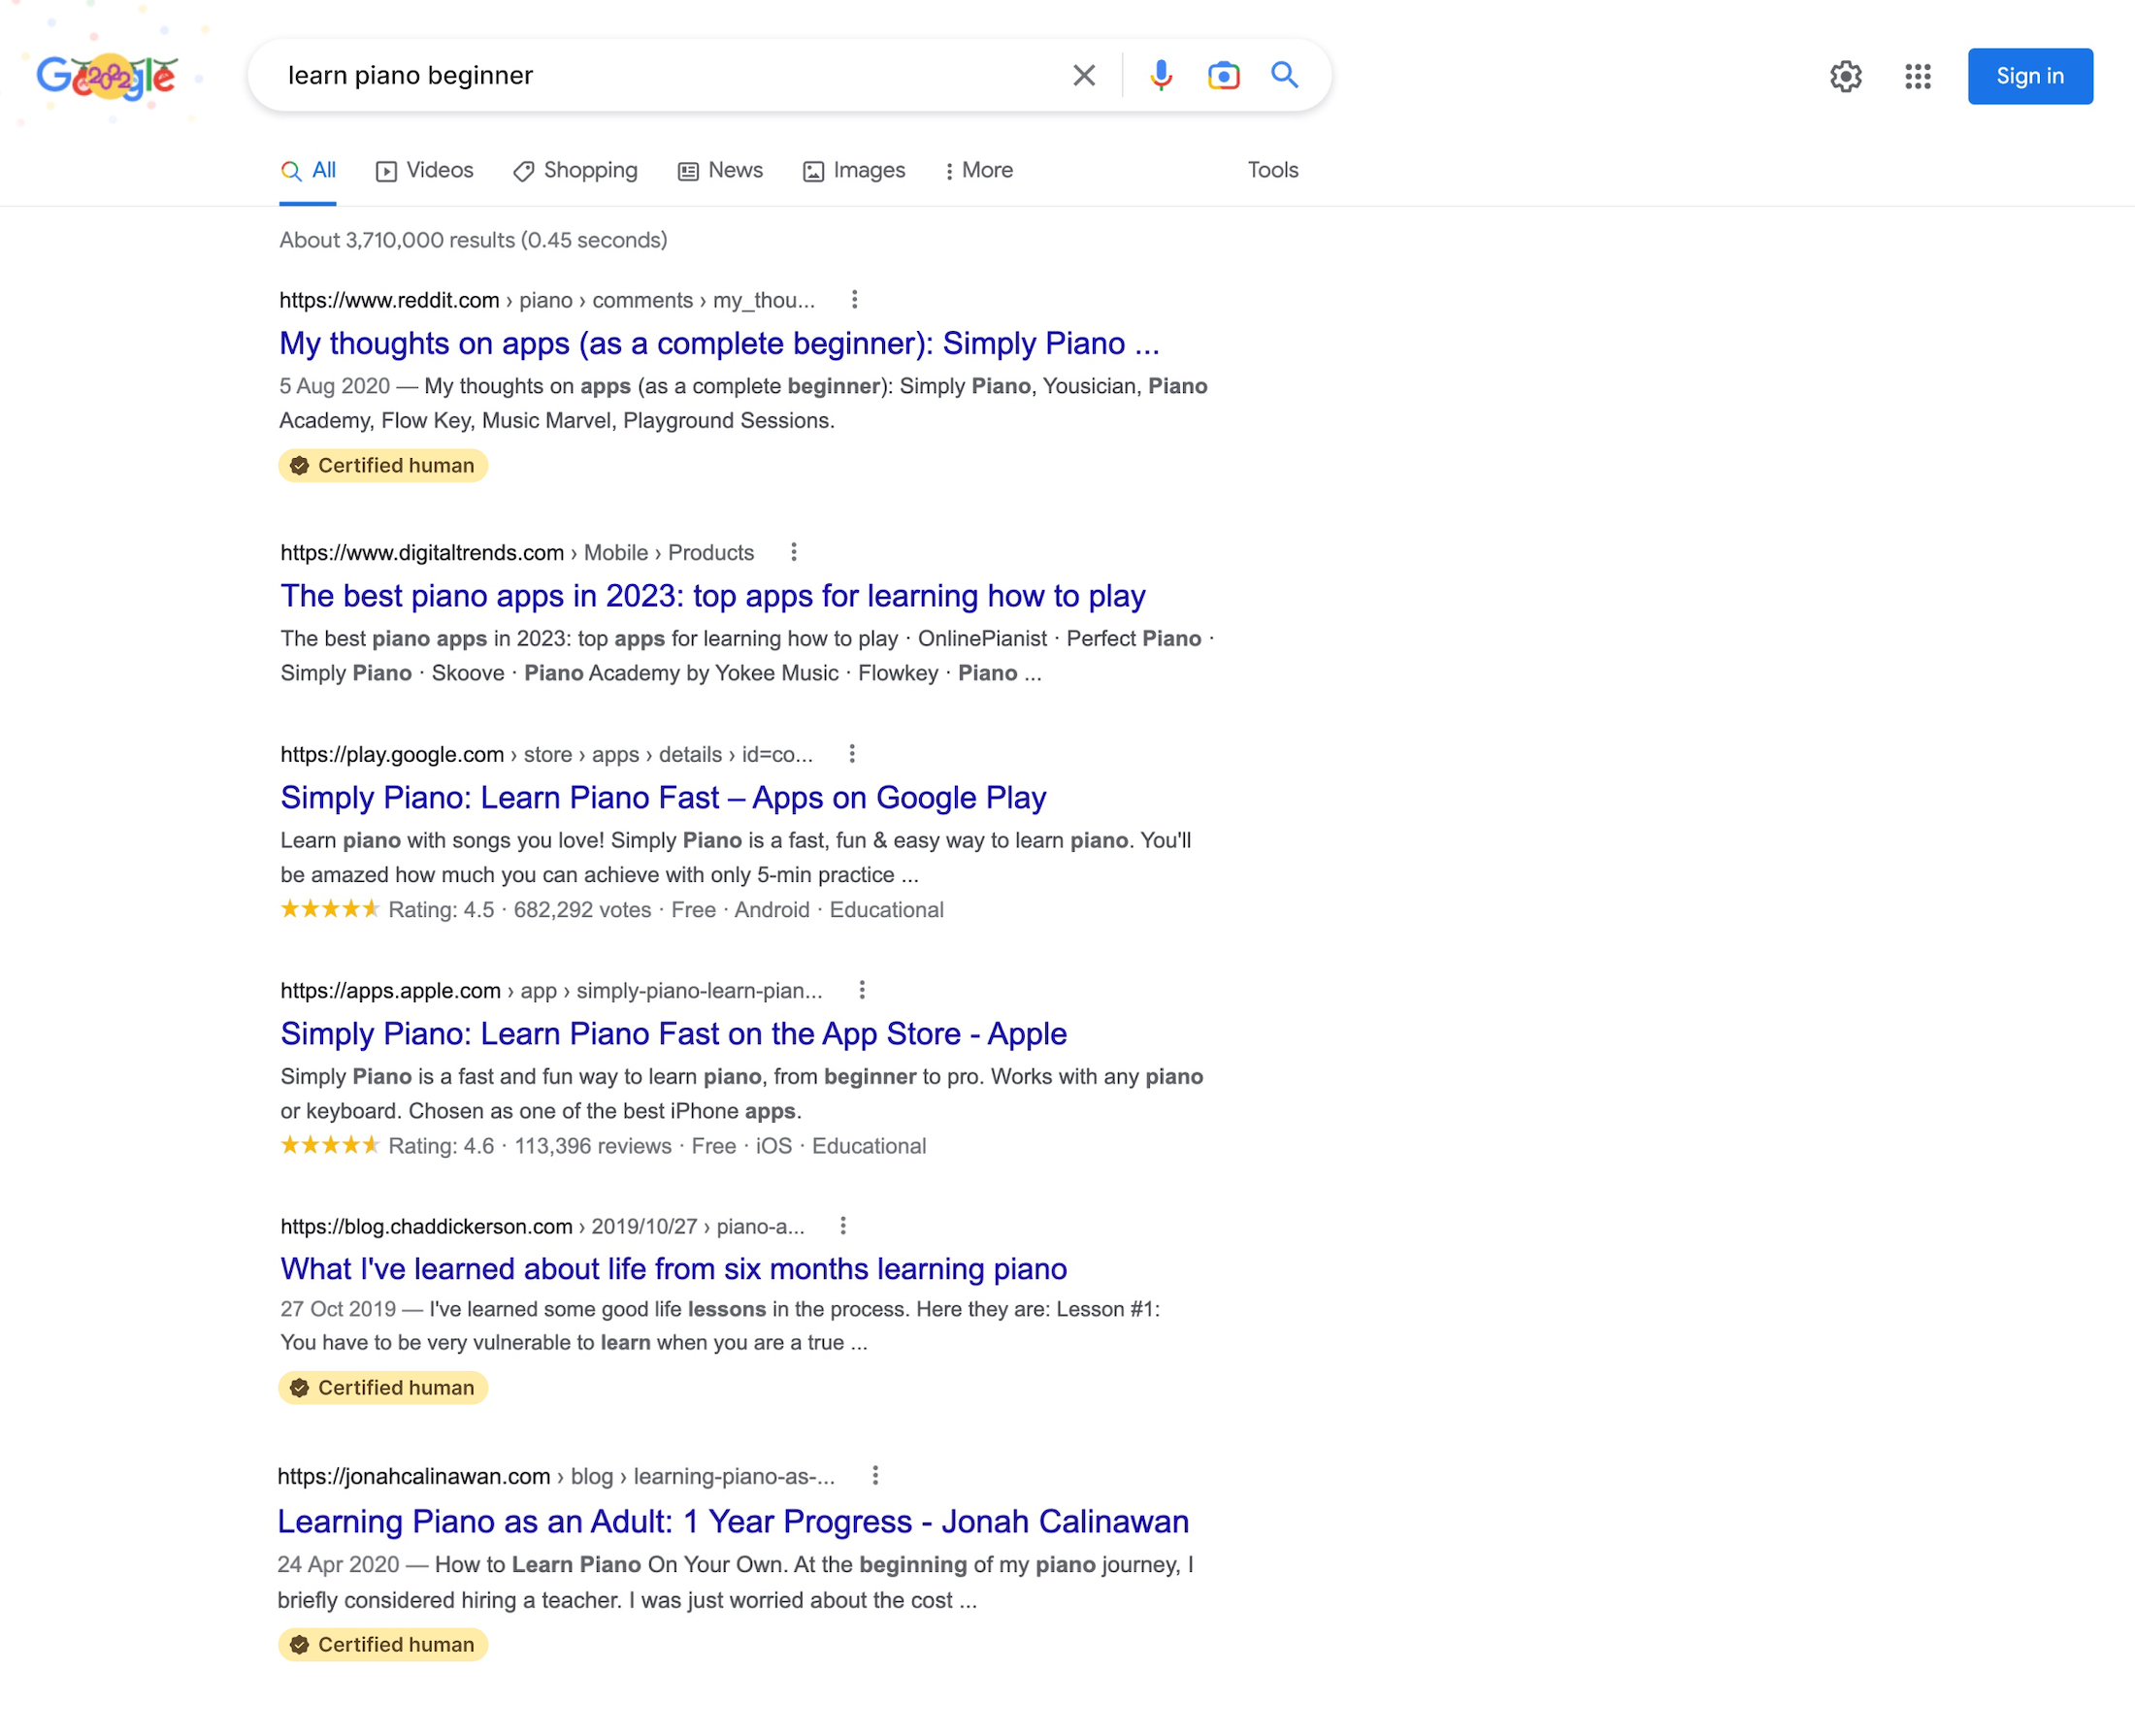 Google search results showing a 'certified human' badge on some items